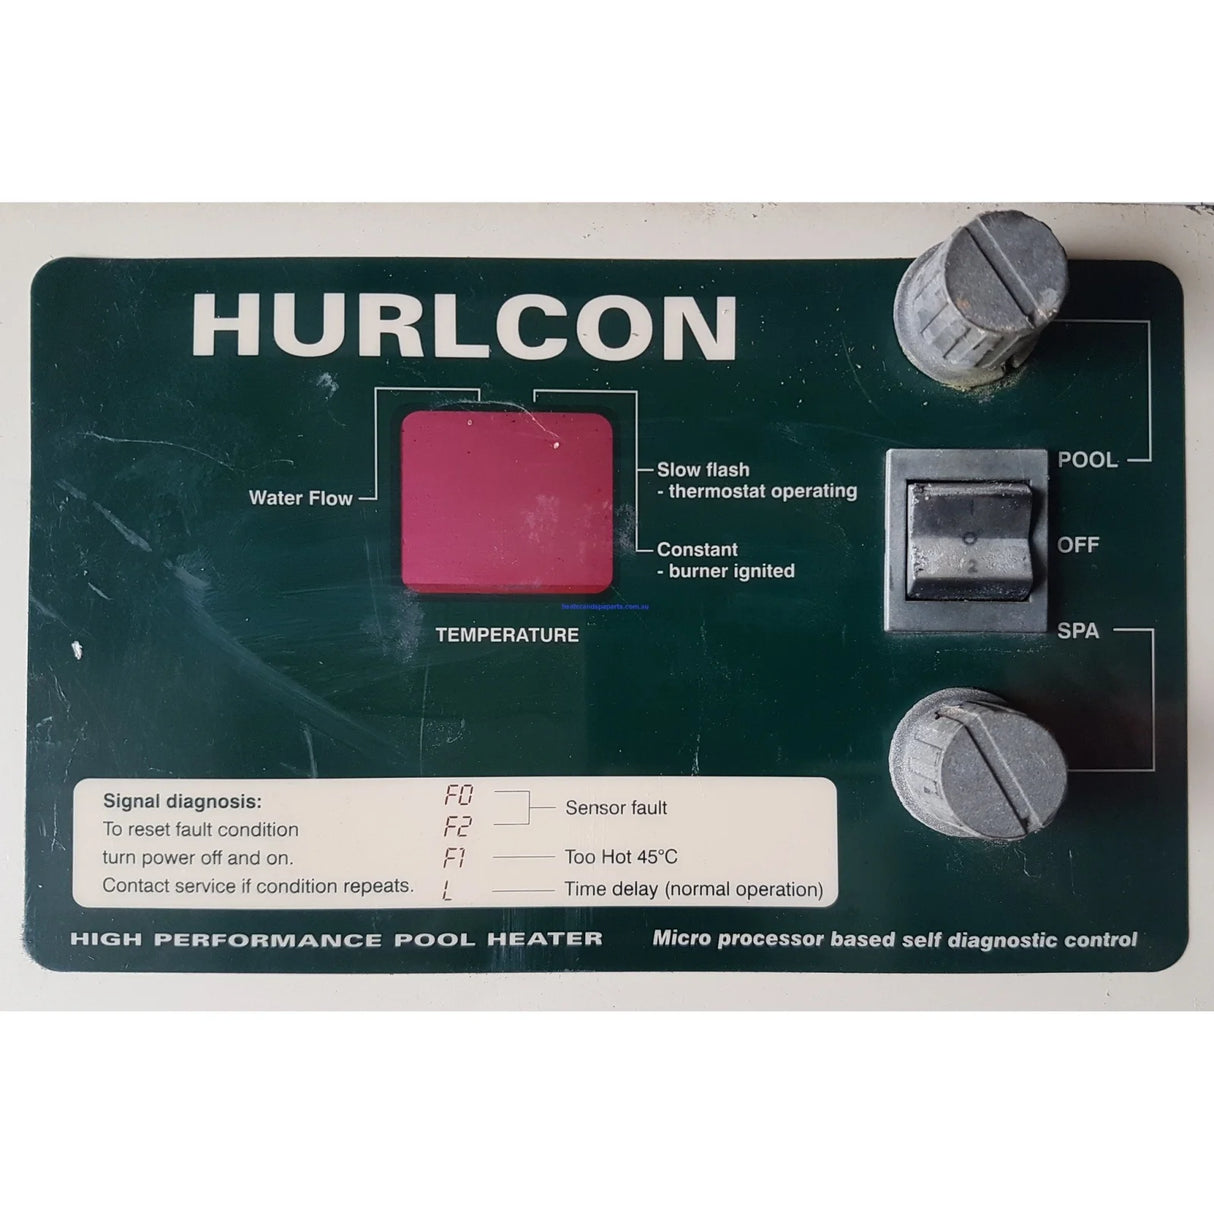 Hurlcon Heater - Very Old Dual Analogue Control PCB - Obsolete - Heater and Spa Parts